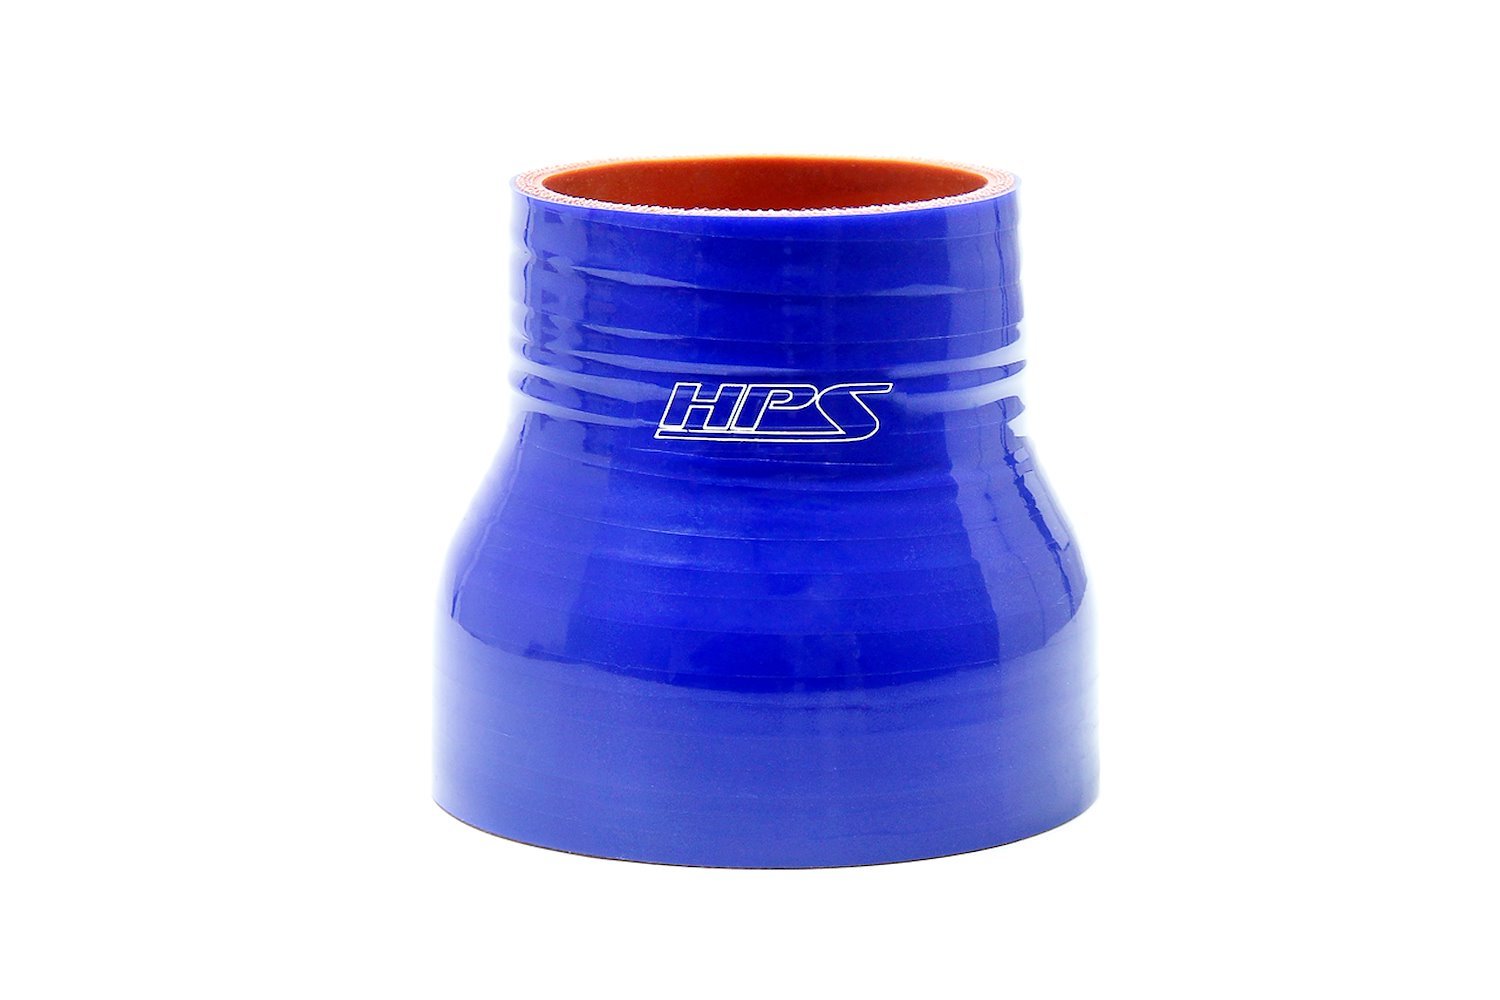 HTSR-238-256-BLUE Silicone Reducer Hose, High-Temp Reinforced, 2-3/8 in. - 2-9/16 in. ID, 3 in. Long, Blue